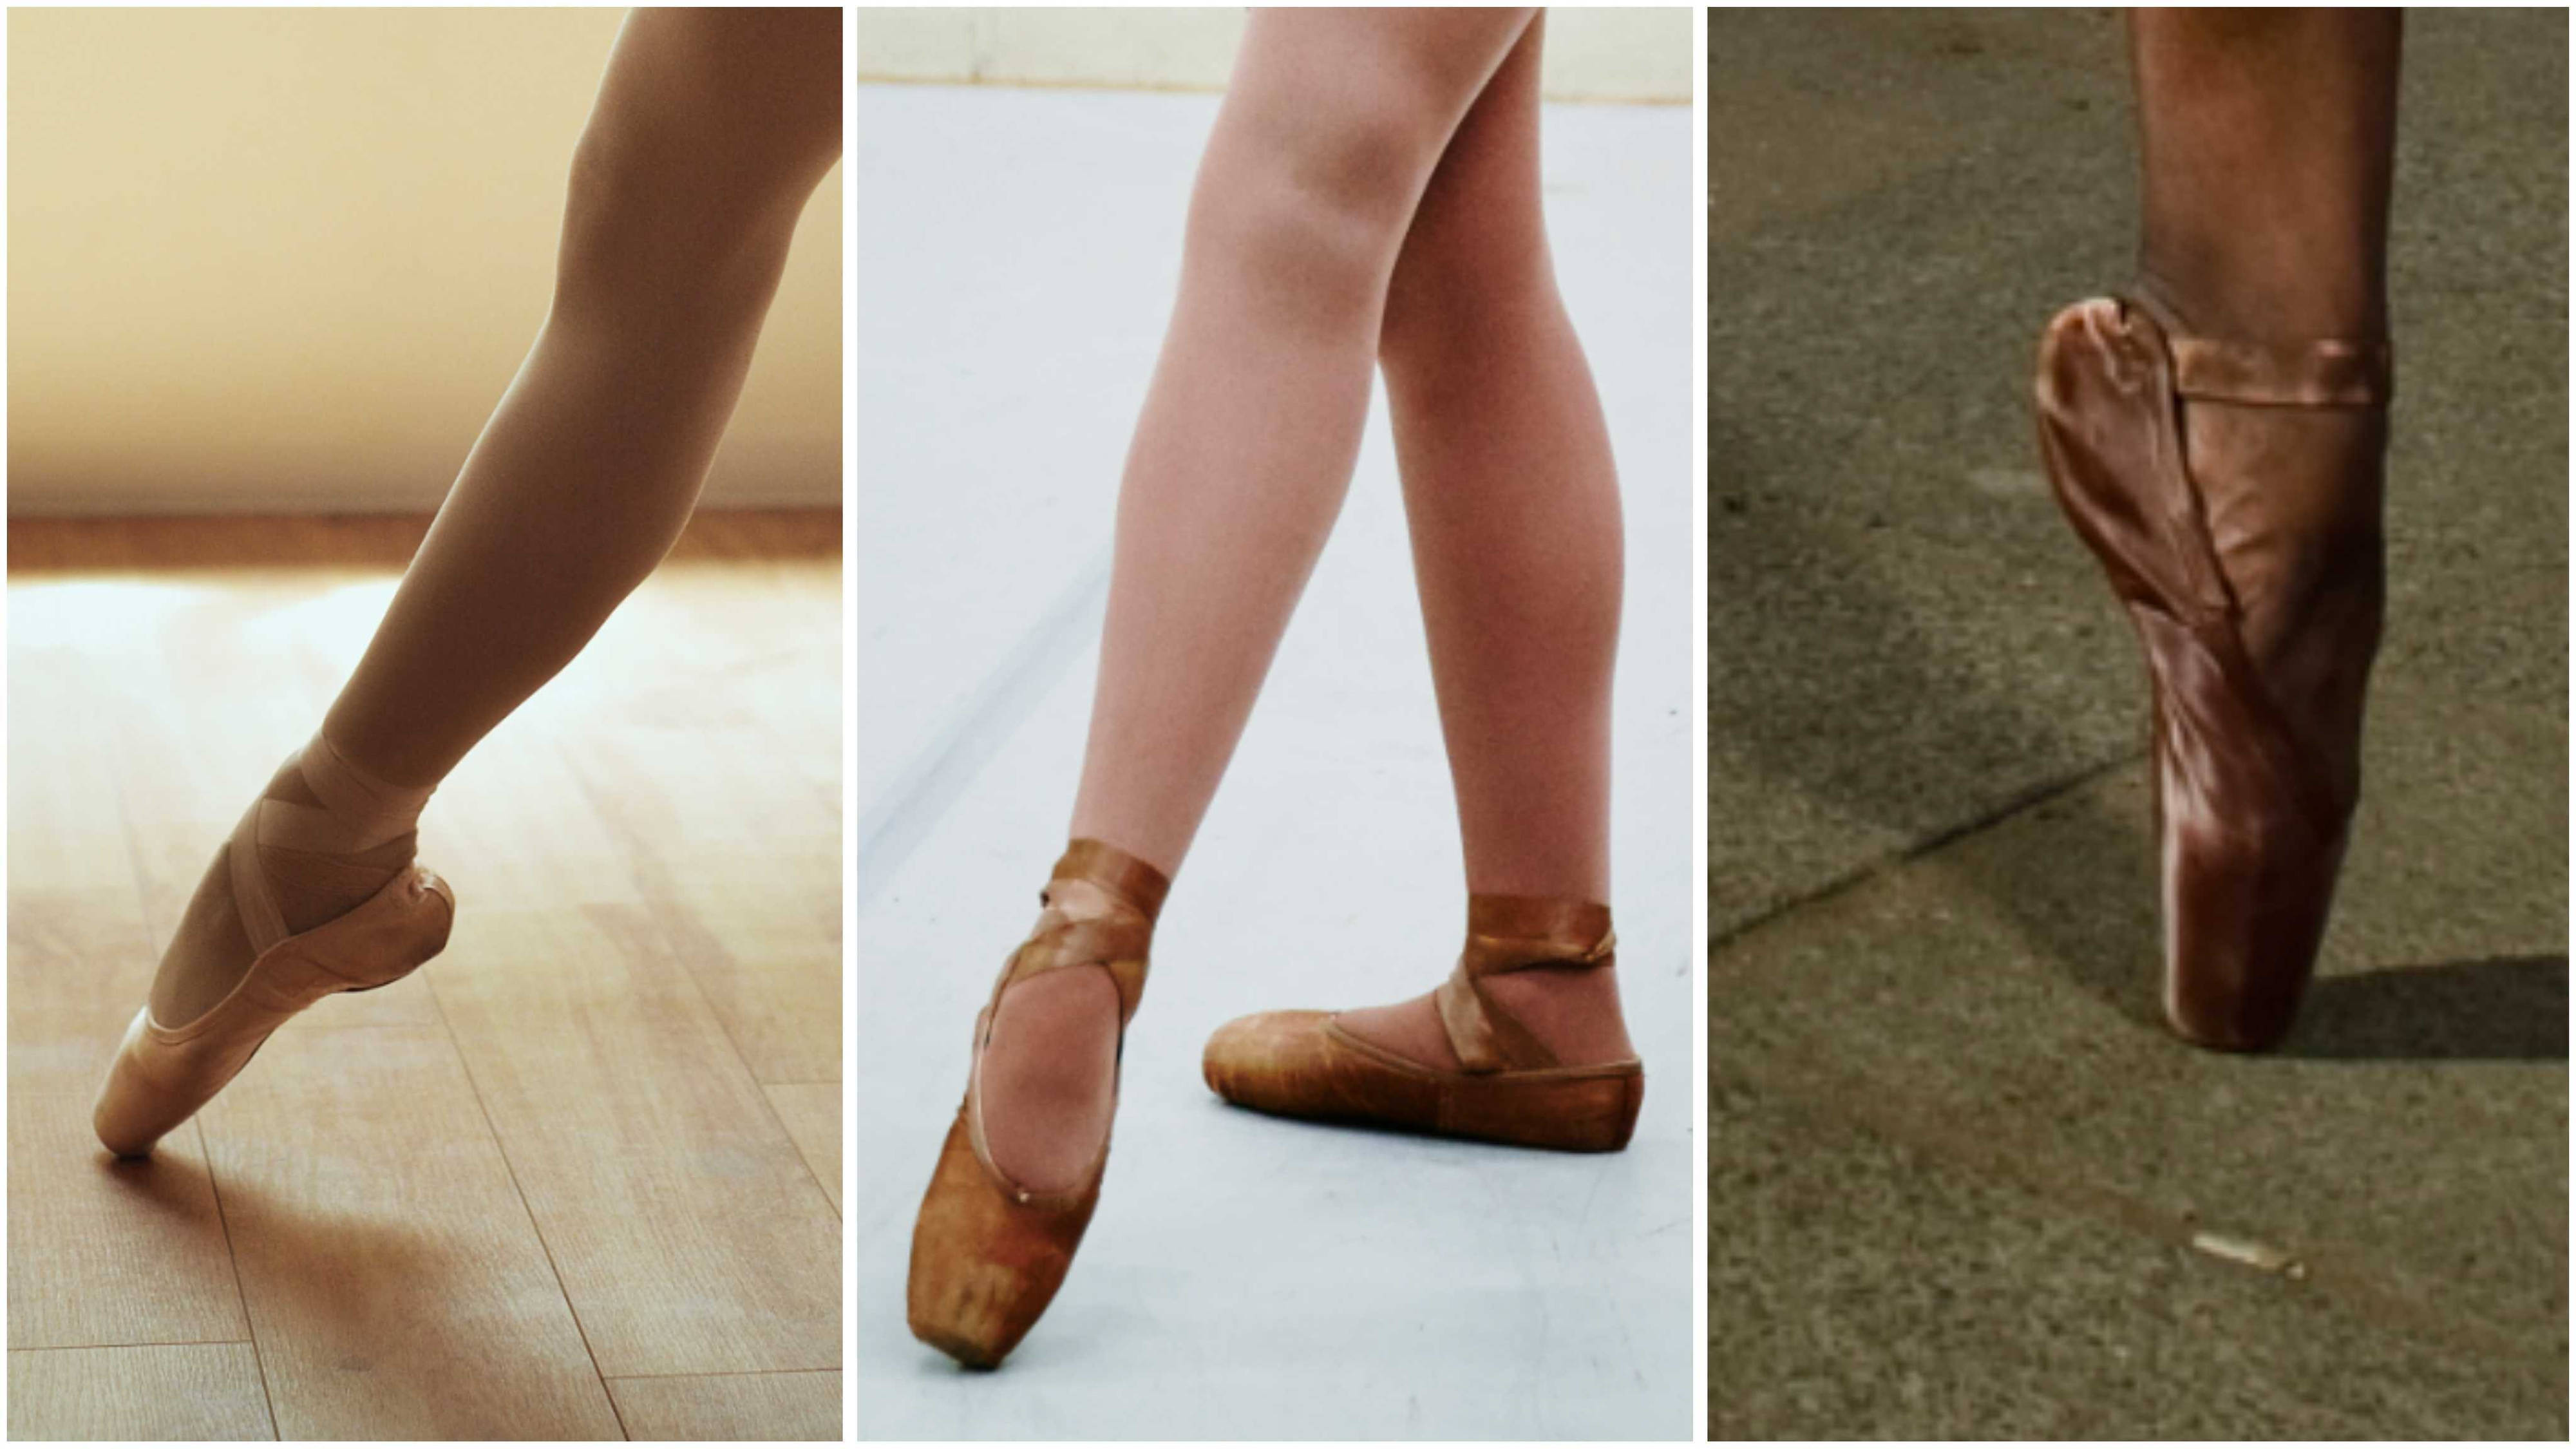 Ballet brand adds darker shades of pointe shoes, as petition calls for  change - Classic FM